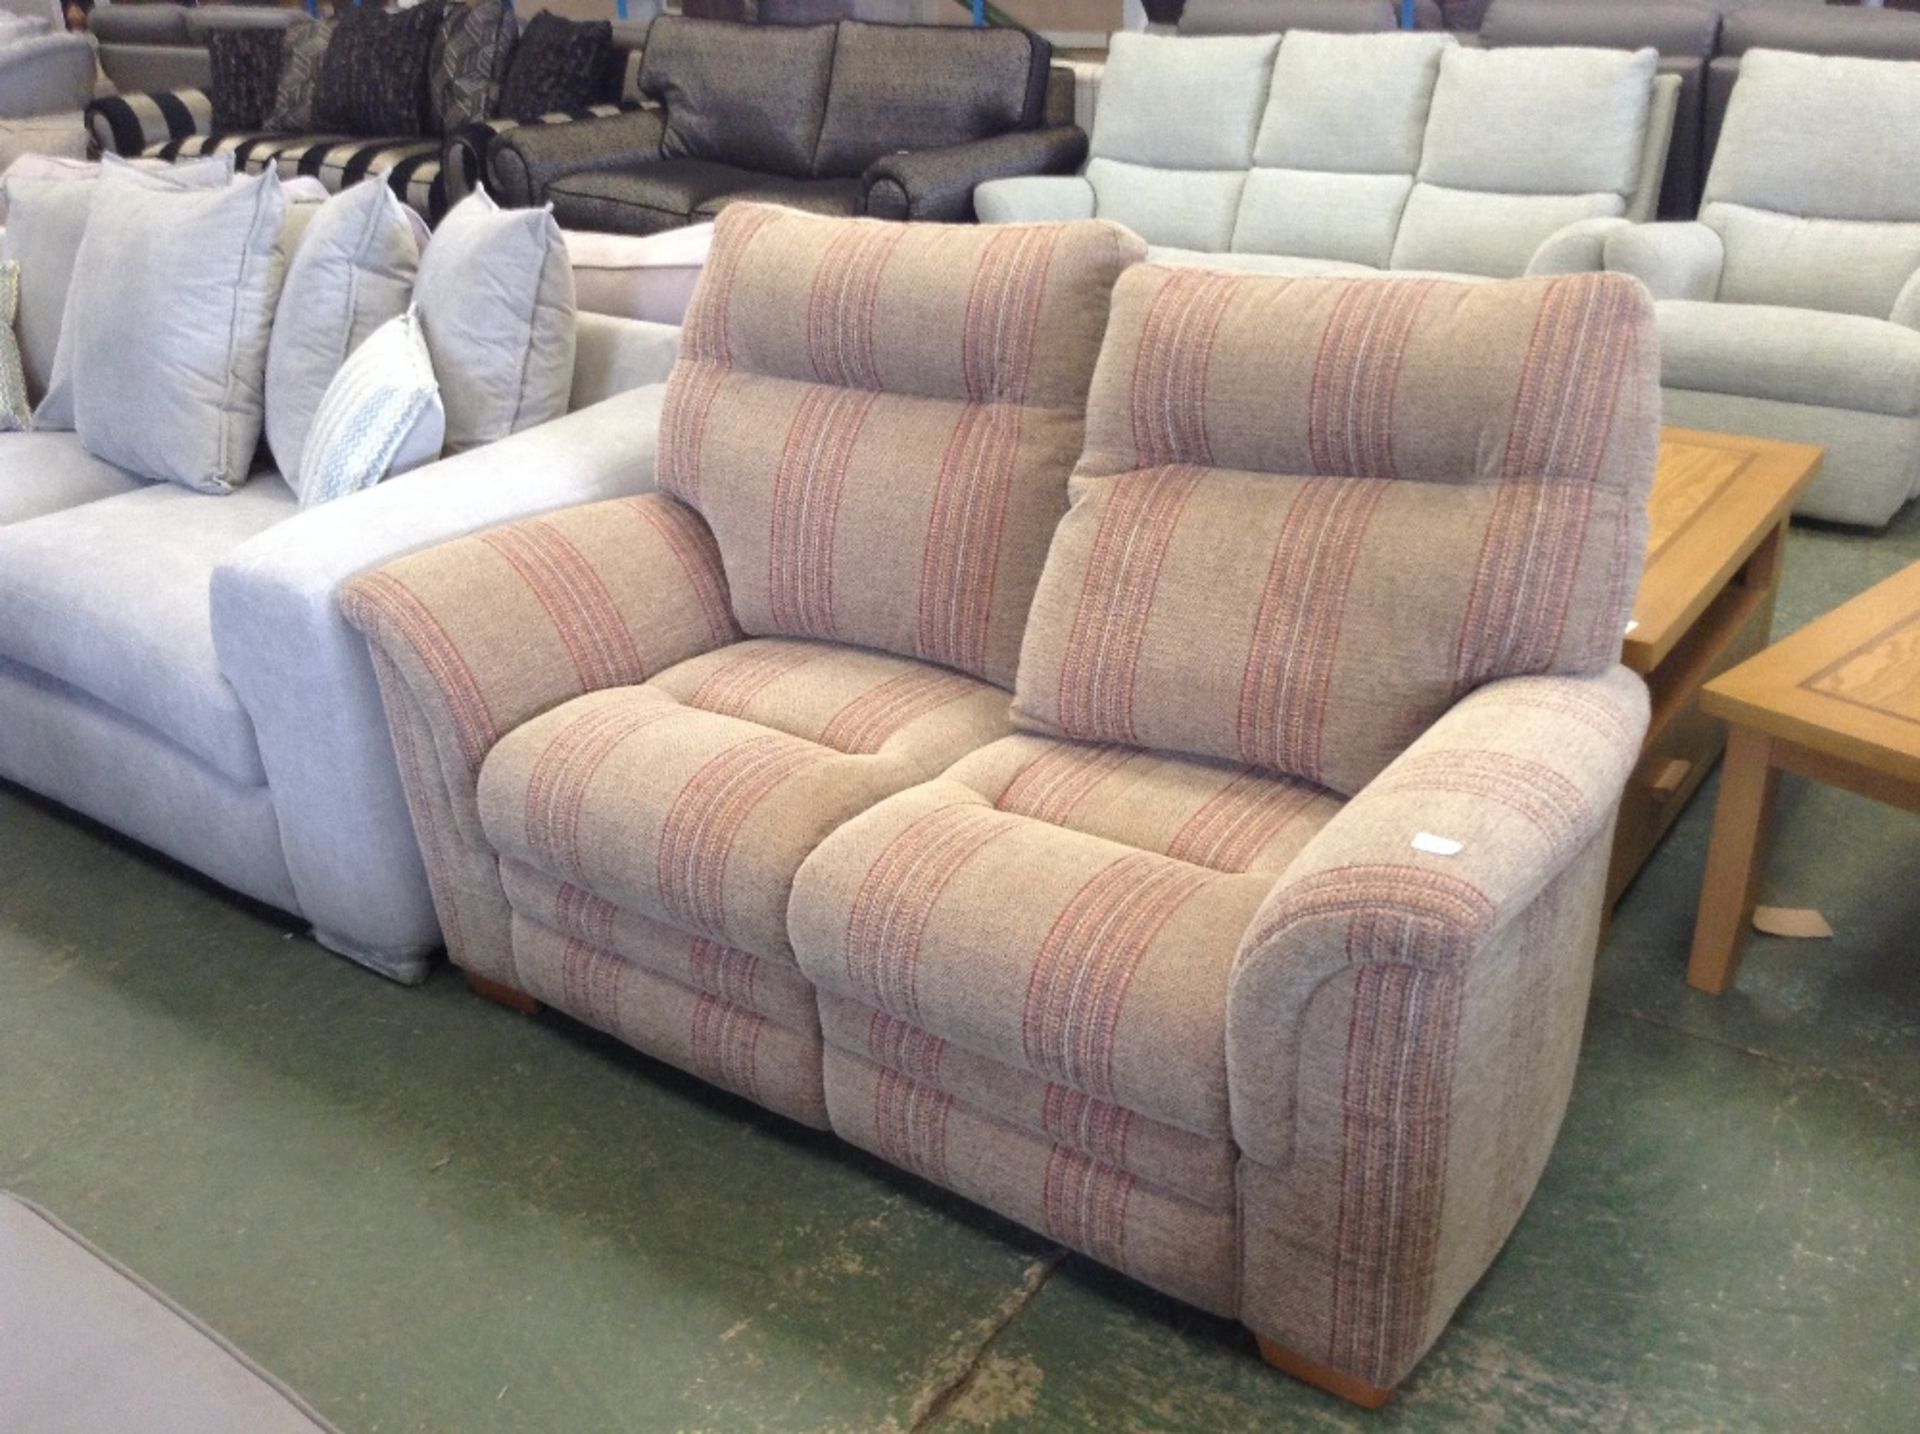 GOLDEN AND MULTI-COLOURED PATTERNED 2 SEATER SOFA